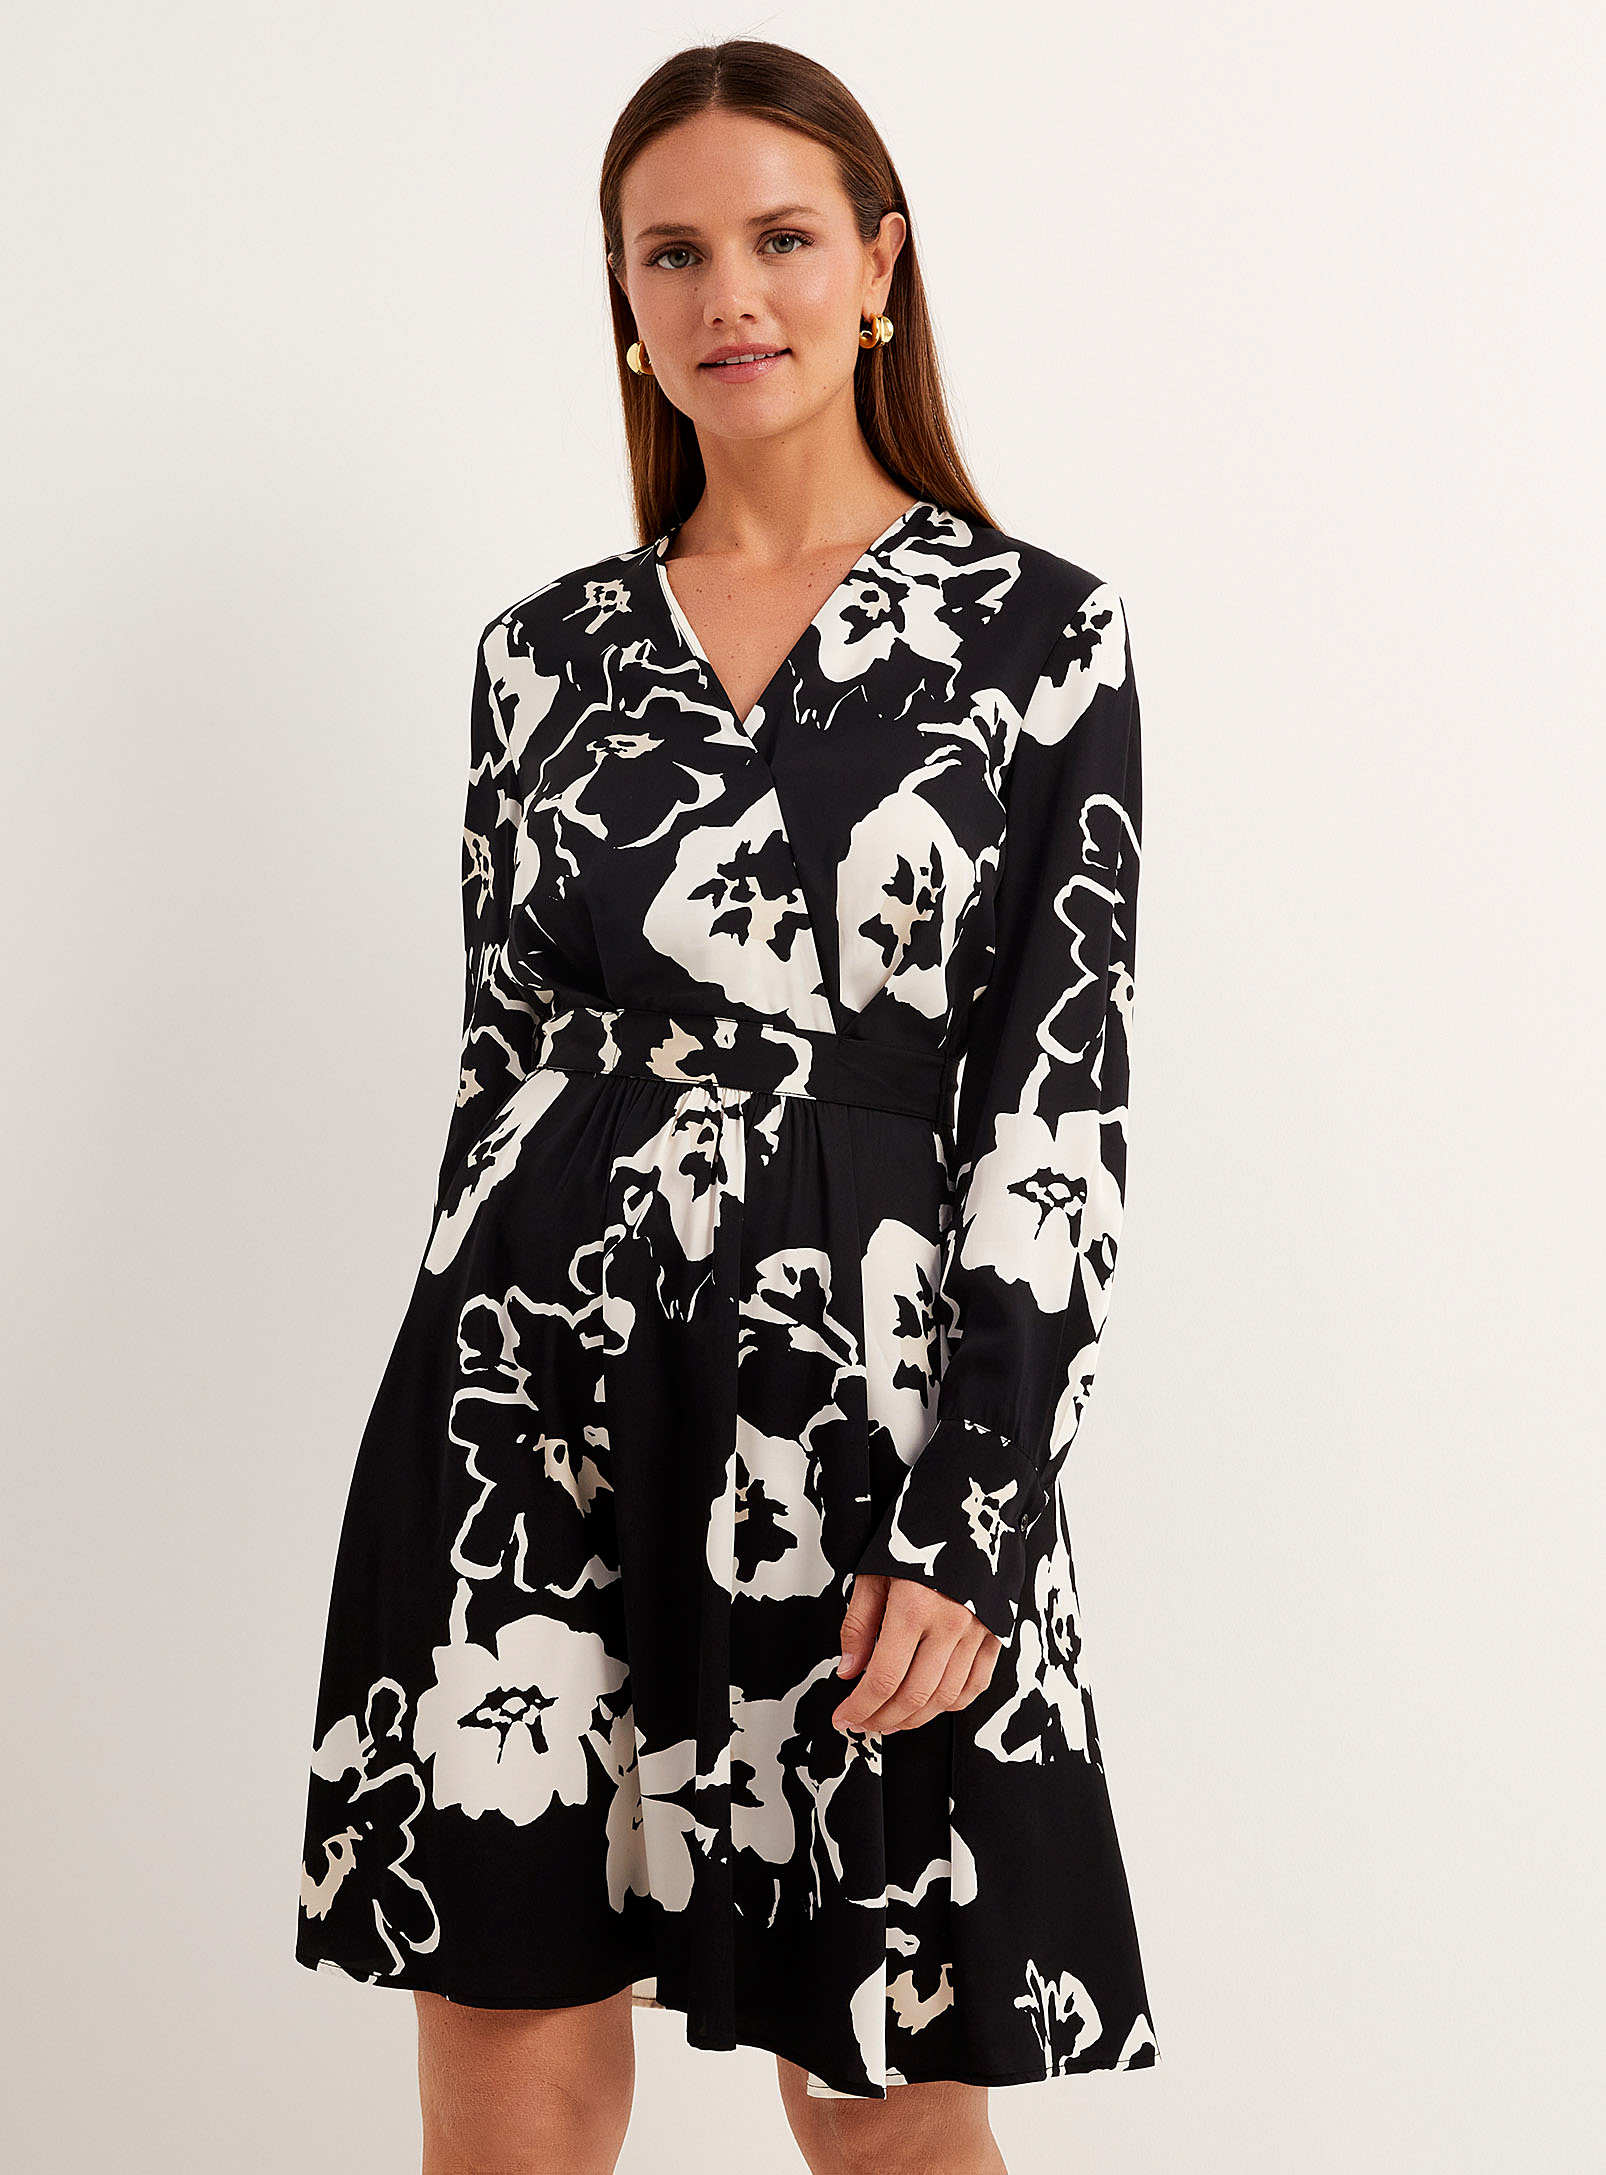 Marc O'Polo - Women's Contrasting floral belted dress